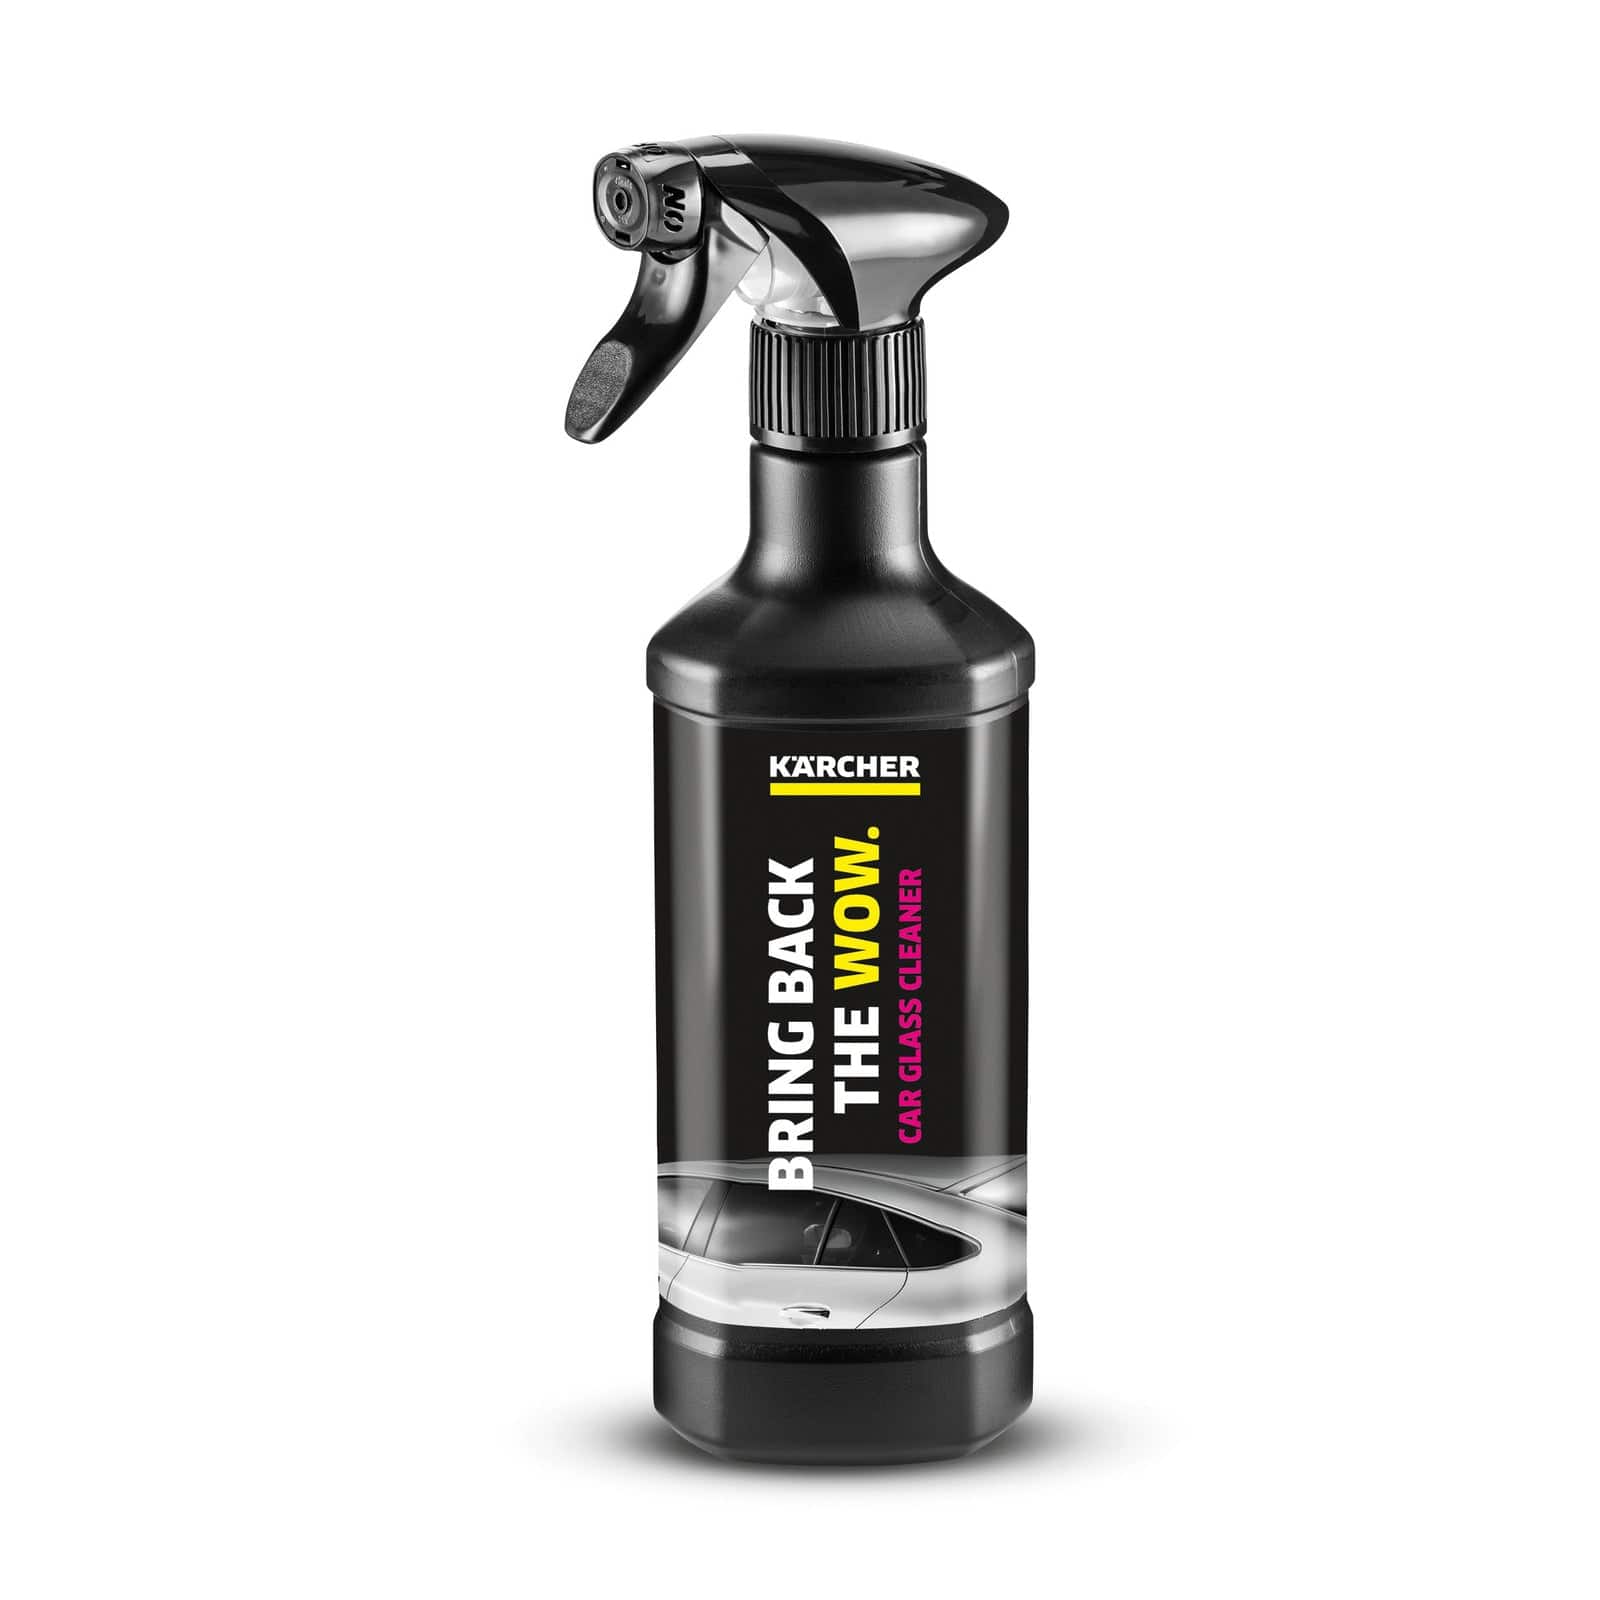 Karcher Interior Cleaner RM 651, 500ML | Supply Master | Accra, Ghana Cleaning Equipment Accessories Buy Tools hardware Building materials